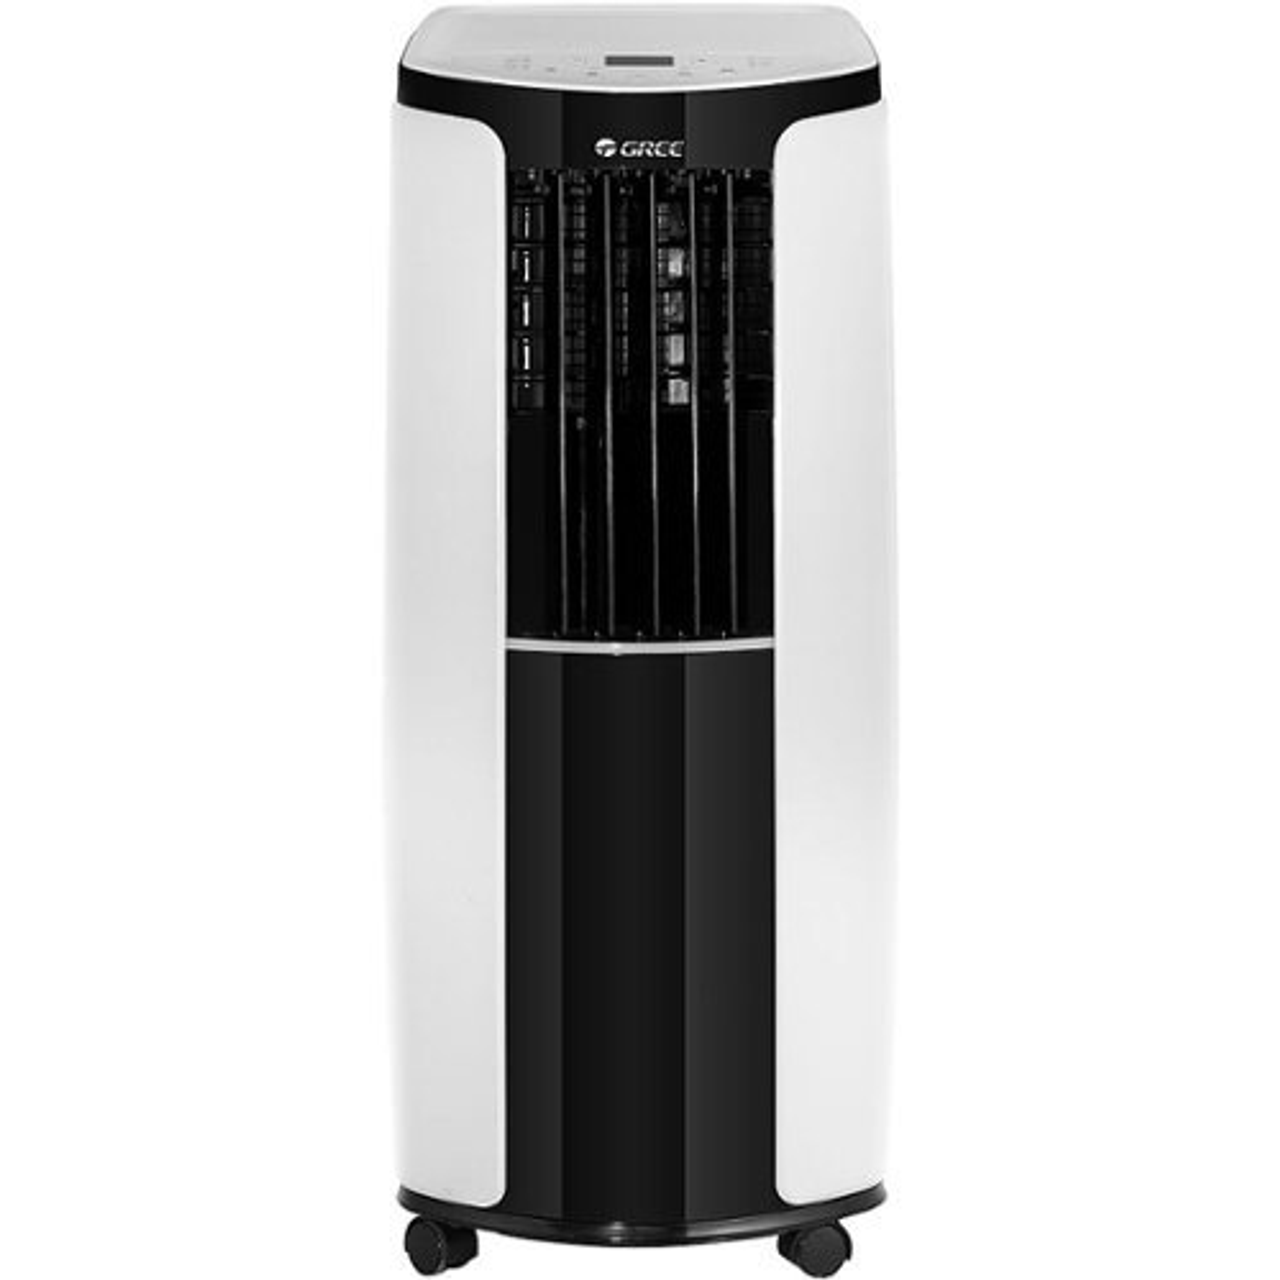 Gree - 6,000 BTU Portable Air Conditioner with Remote Control | AC for Rooms up to 250 Sq.Ft | Wheels | Dehumidifer - White/Black